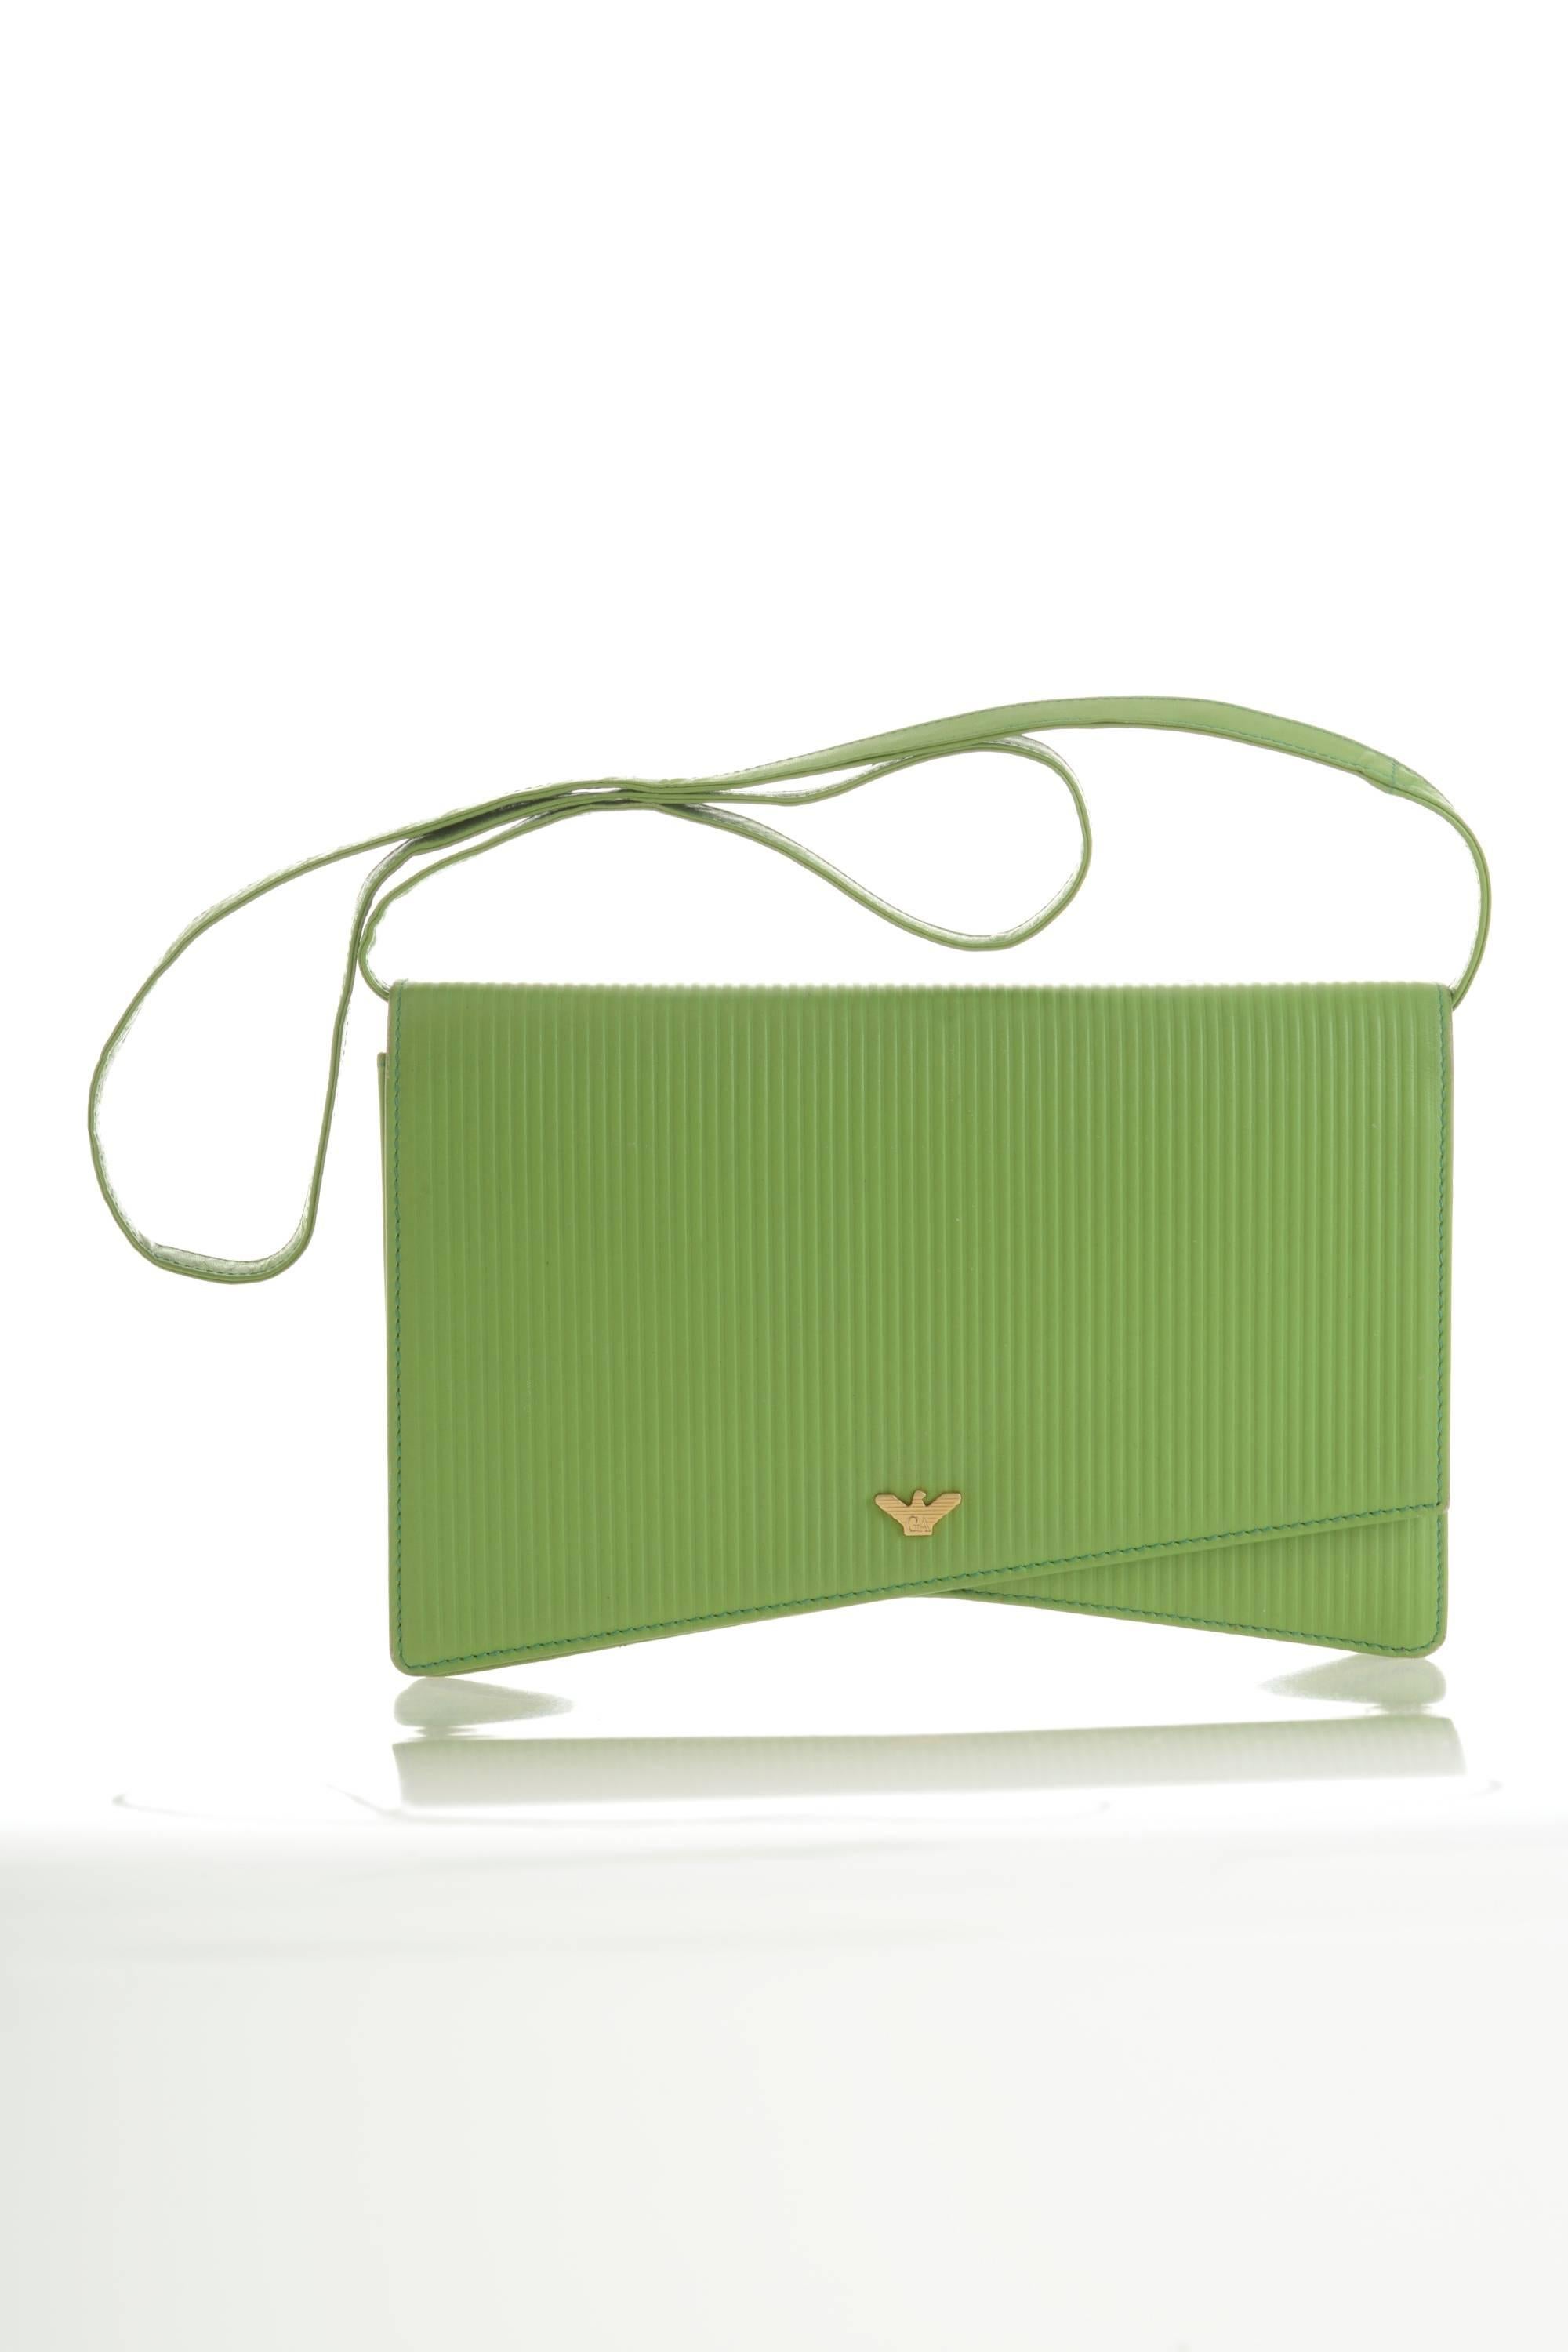 This lovely Giorgio Armani clutch shoulder bag is in a apple green striped printed leather with golden metal Logo detail. It has removable shoulder strap and snap closure.
With strap for easy cross body or shoulder bag.
It's perfect for any